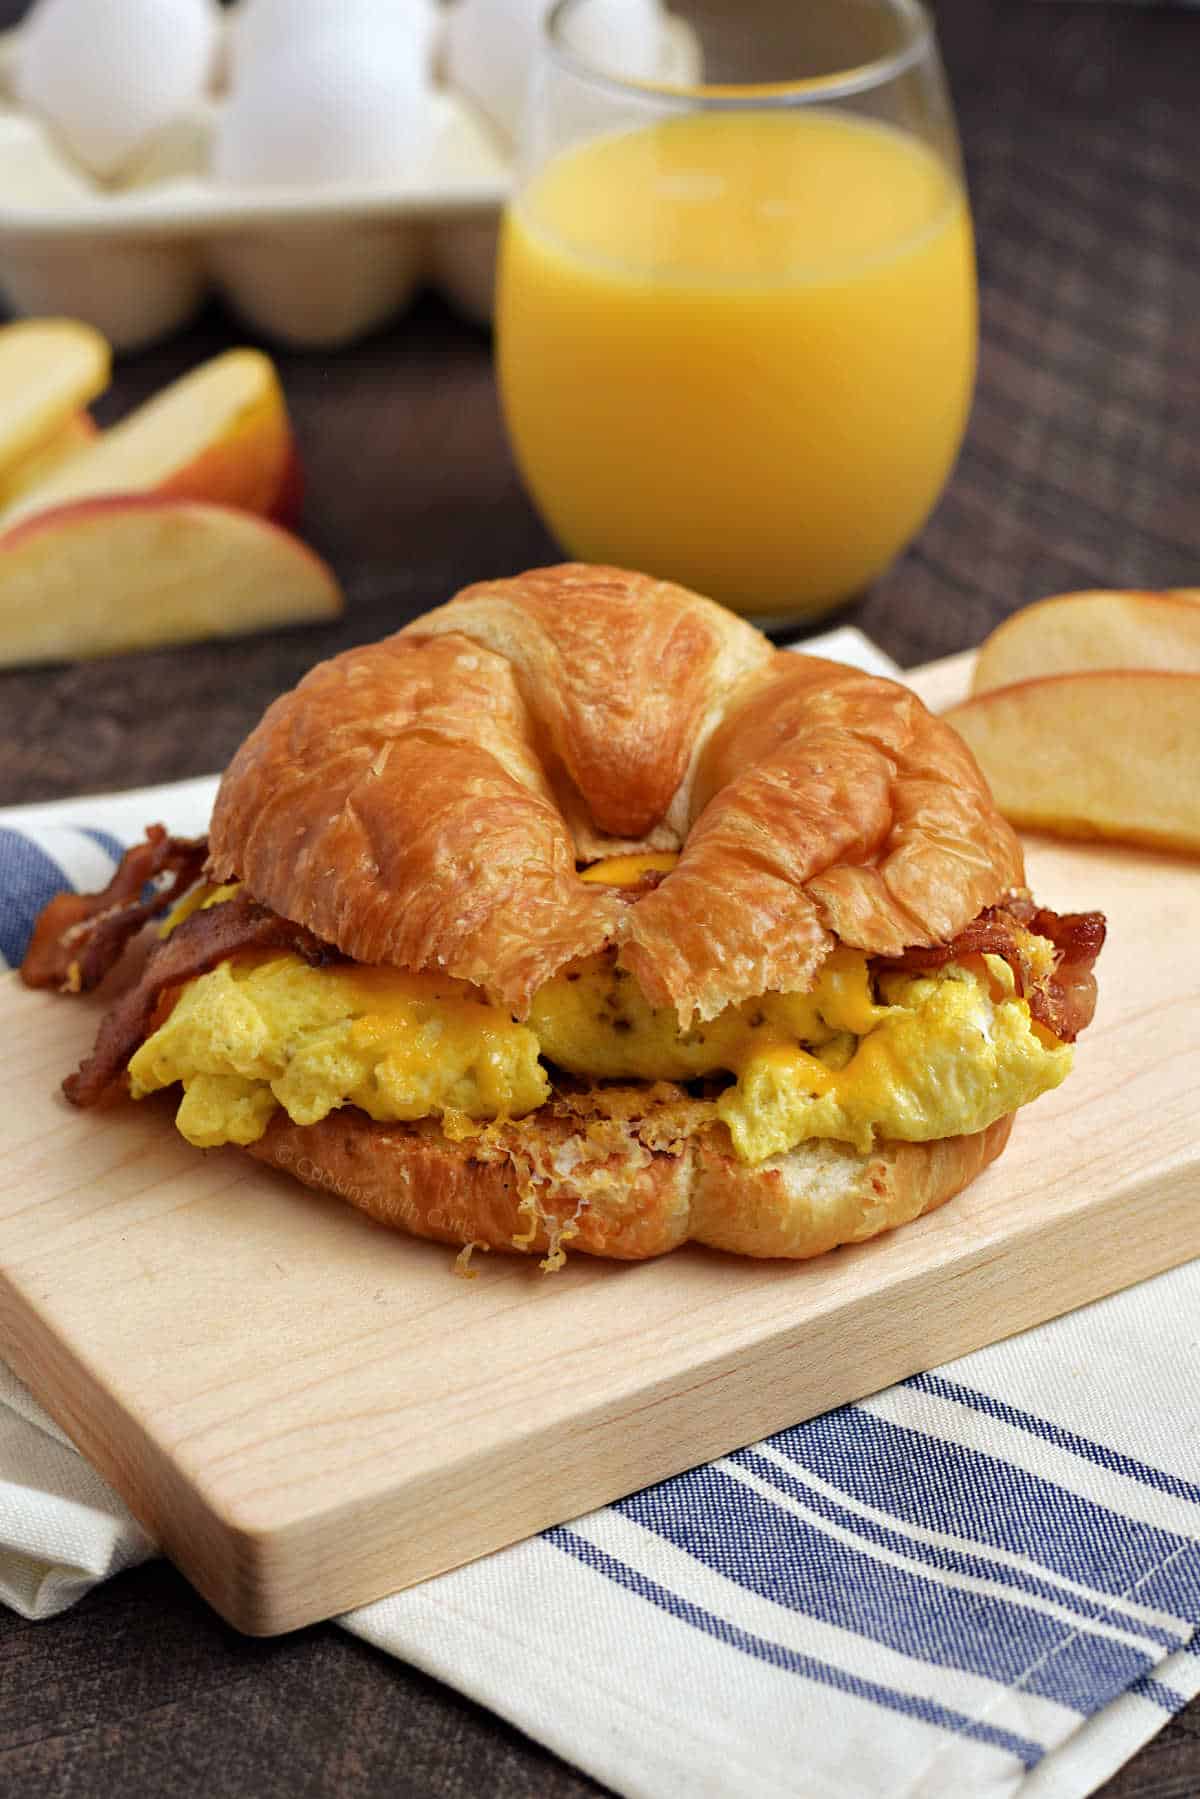 Bacon, scrambled egg, and melted cheese on a croissant with orange juice in the background.